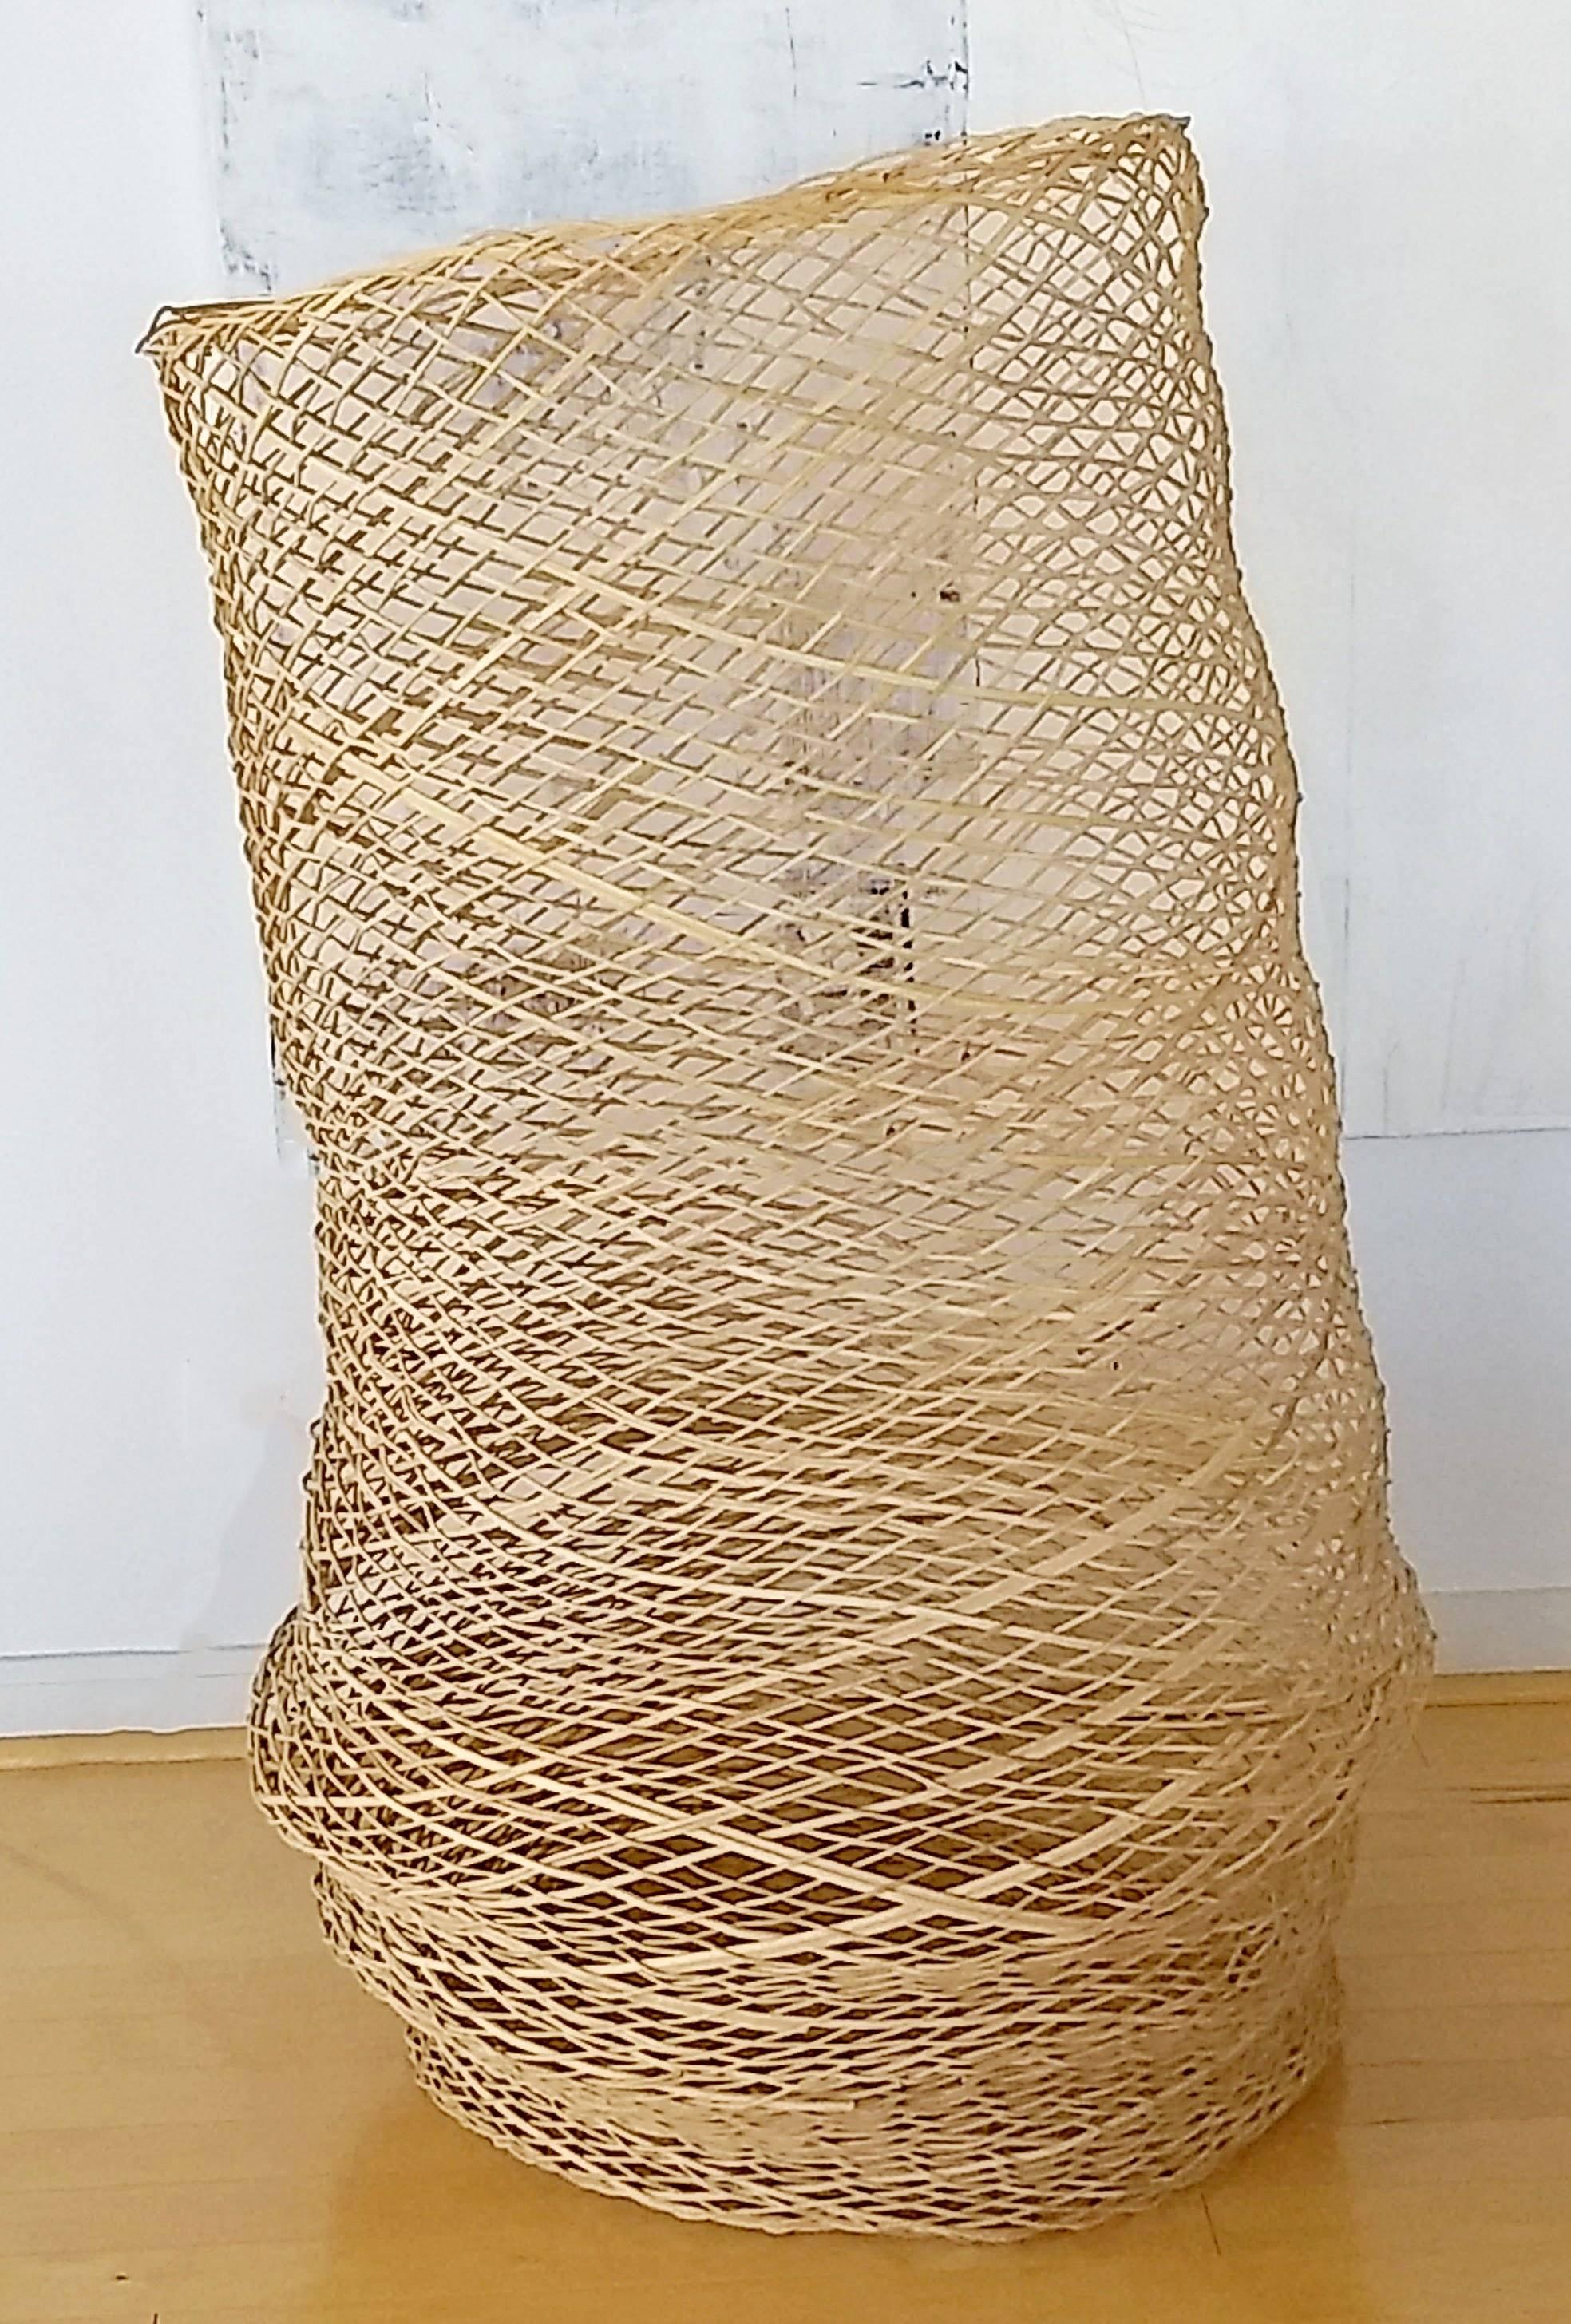 For your consideration is a great, woven floor sculpture of a basket. In excellent condition. The dimensions are 28